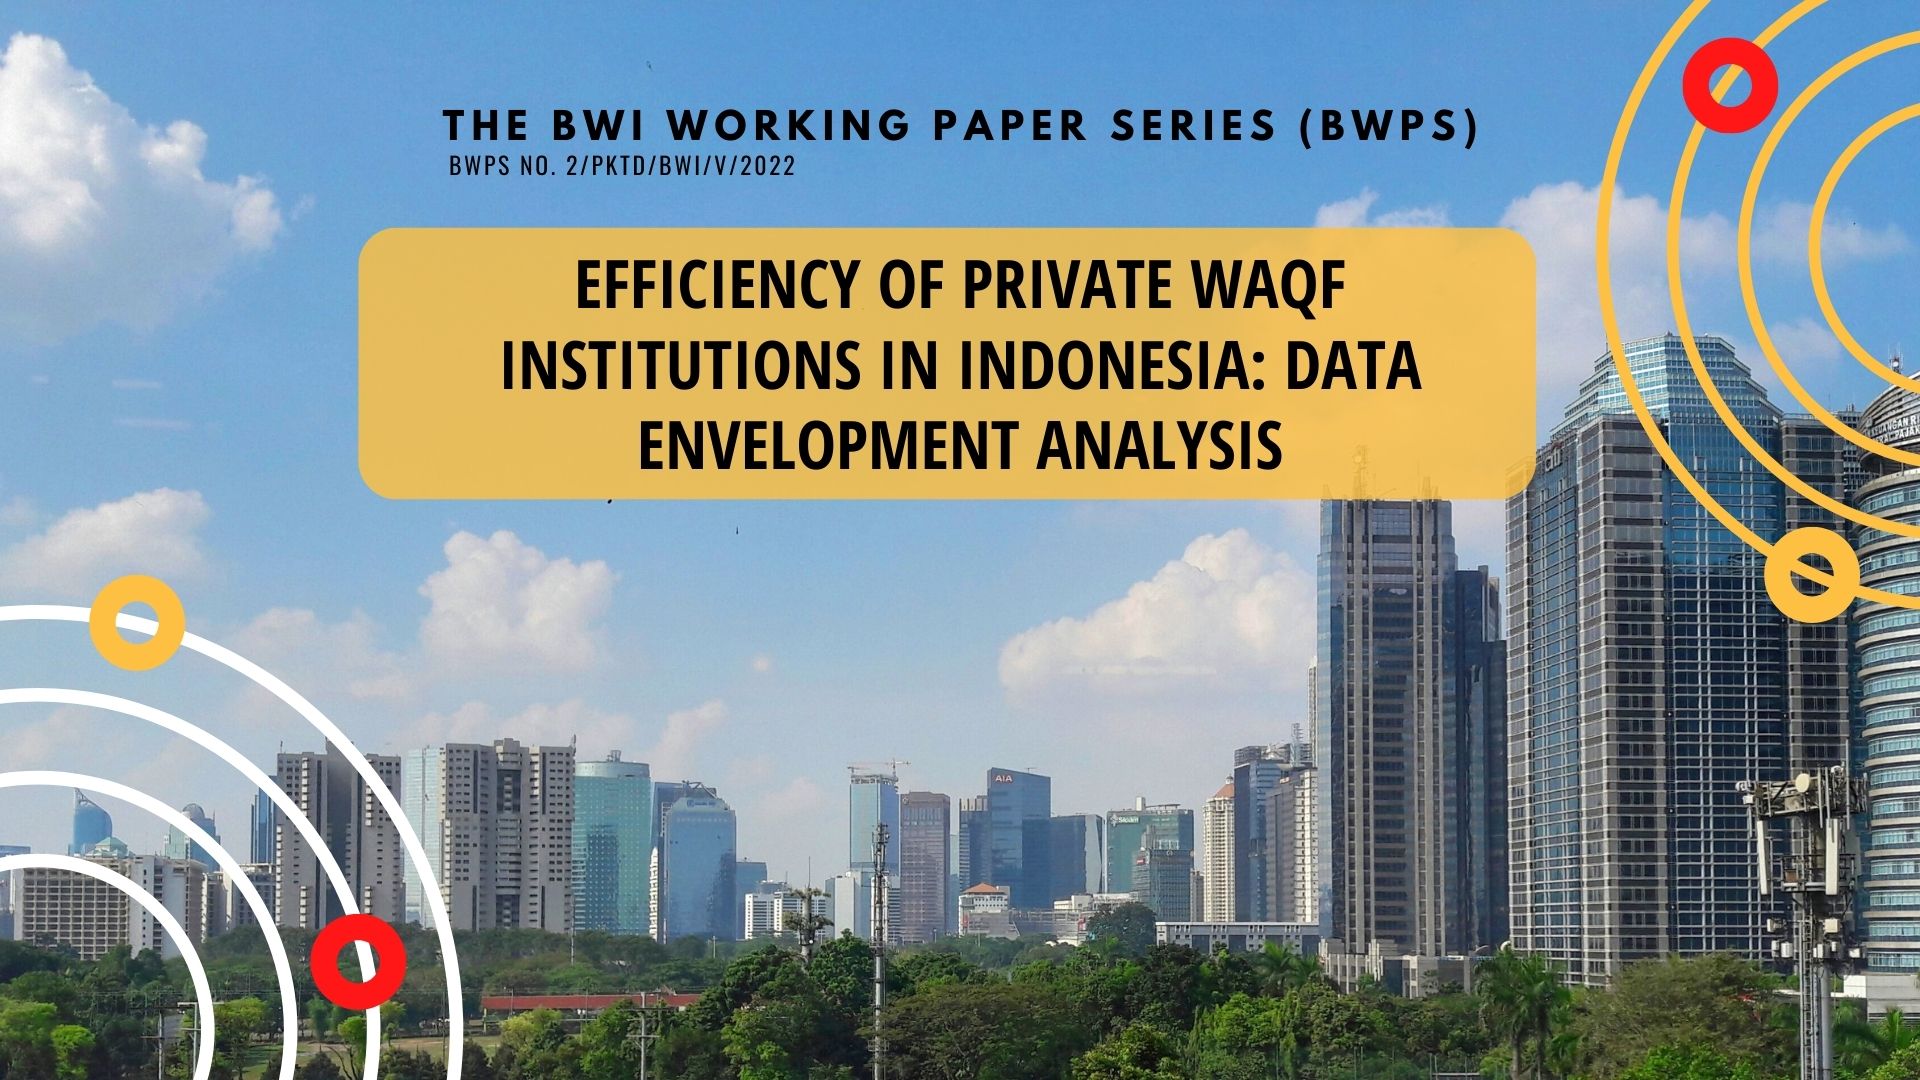 Efficiency of Private Waqf Institutions in Indonesia: Data Envelopment Analysis – BWPS No. 2 2022  - BWPS 02 Mei 2022 - Efficiency of Private Waqf Institutions in Indonesia: Data Envelopment Analysis &#8211; BWPS No. 2 2022